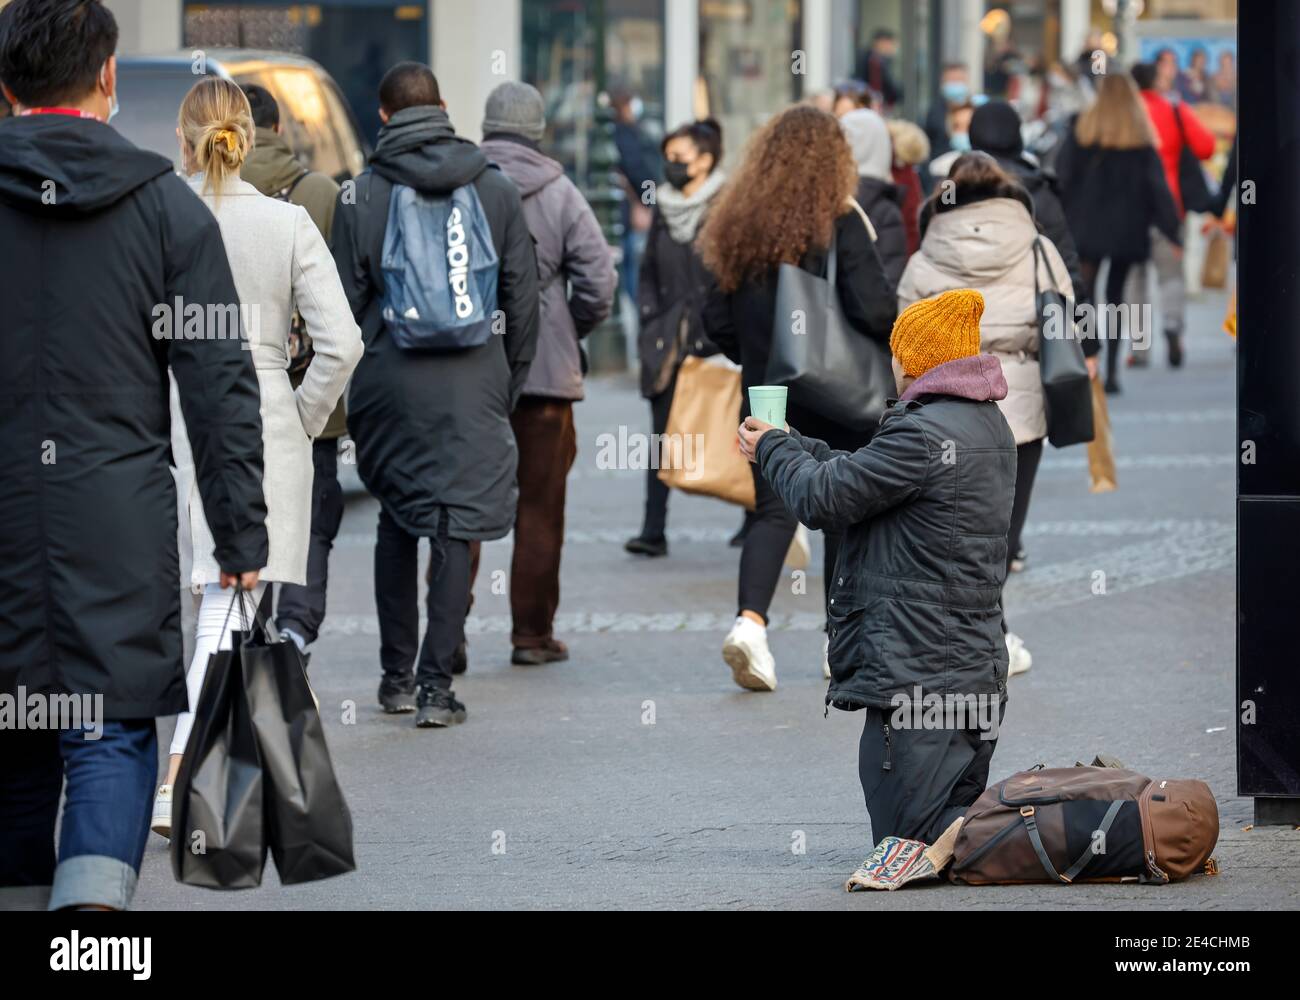 Duesseldorf, North Rhine-Westphalia, Germany - Beggar sits on the pavement in Düsseldorf's old town in times of the corona crisis during the second part of lockdown at Christmas time in the pedestrian zone, many passers-by with shopping bags go by. Stock Photo